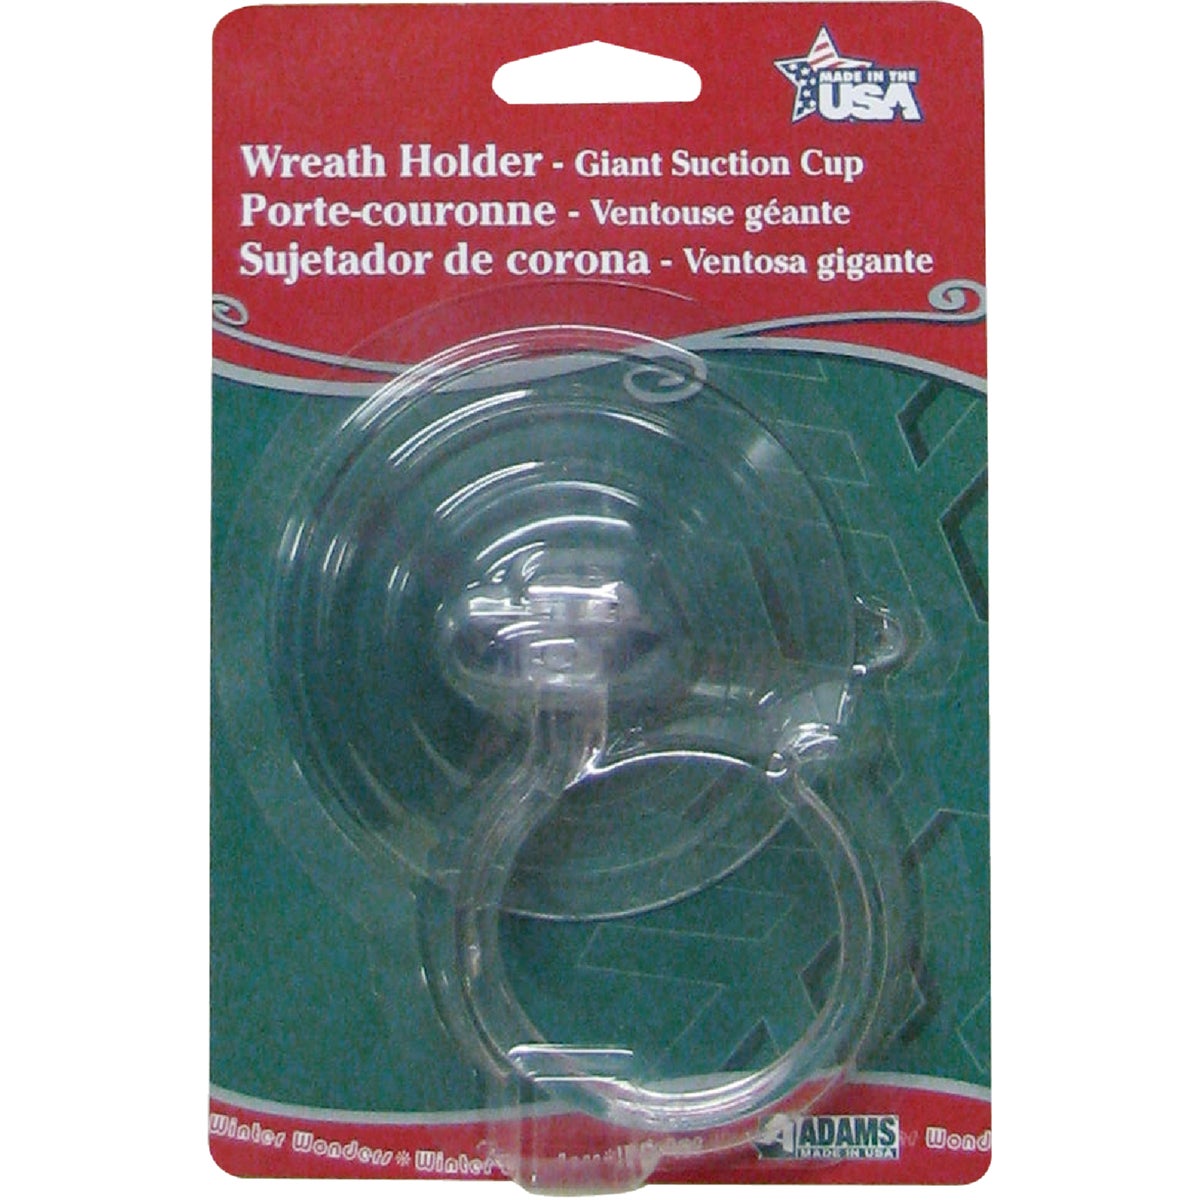 Item 905984, Giant suction cup is strong and durable.